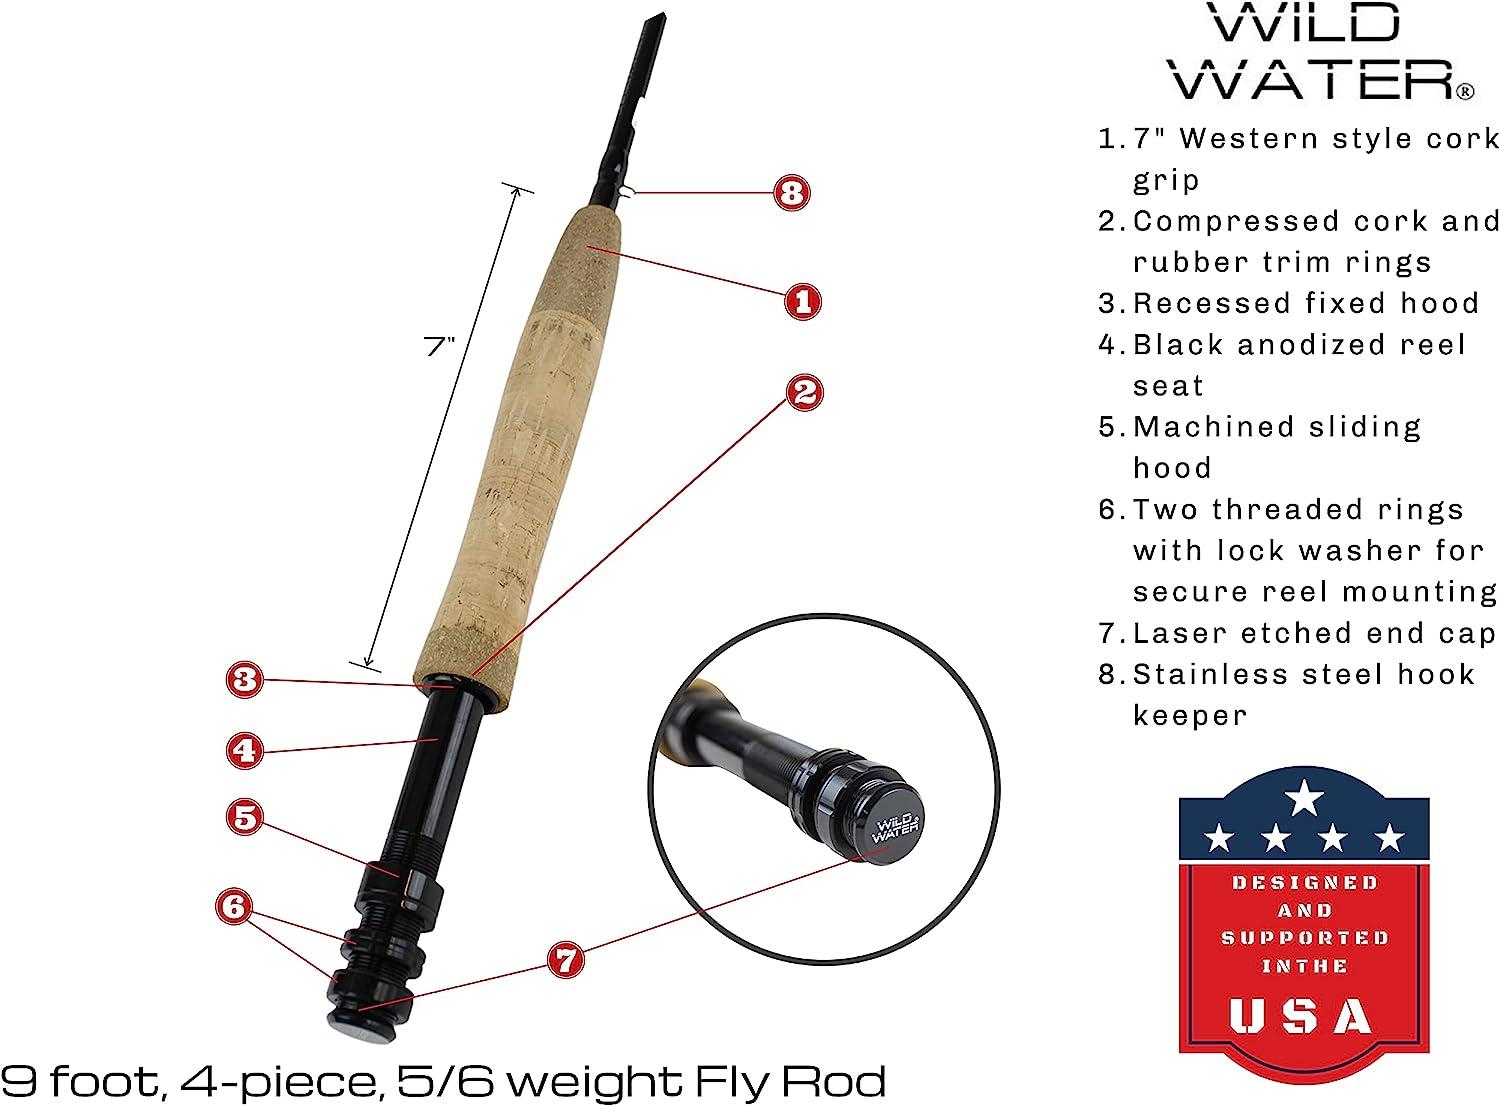 Wild Water Fly Fishing AX Series Fly Rod, IM8 Graphite Blank